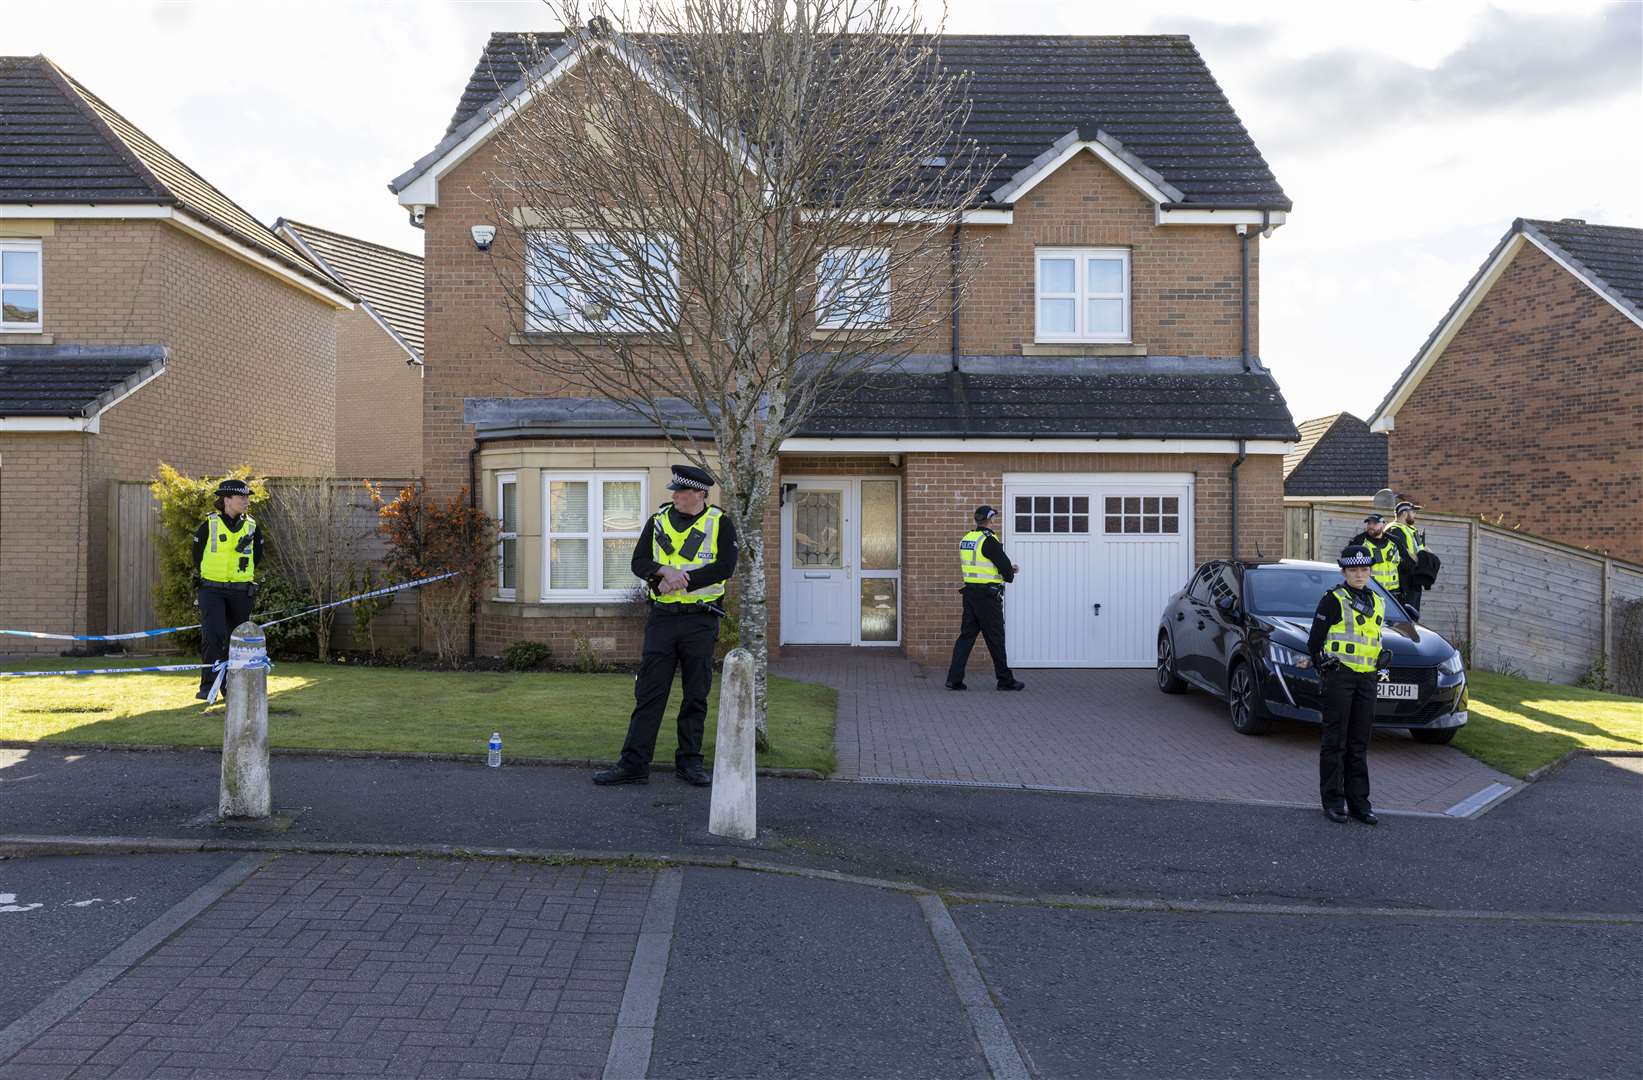 Police searched the home shared by former SNP chief executive Peter Murrell and his wife, former Scottish first minister Nicola Sturgeon (Robert Perry/PA)